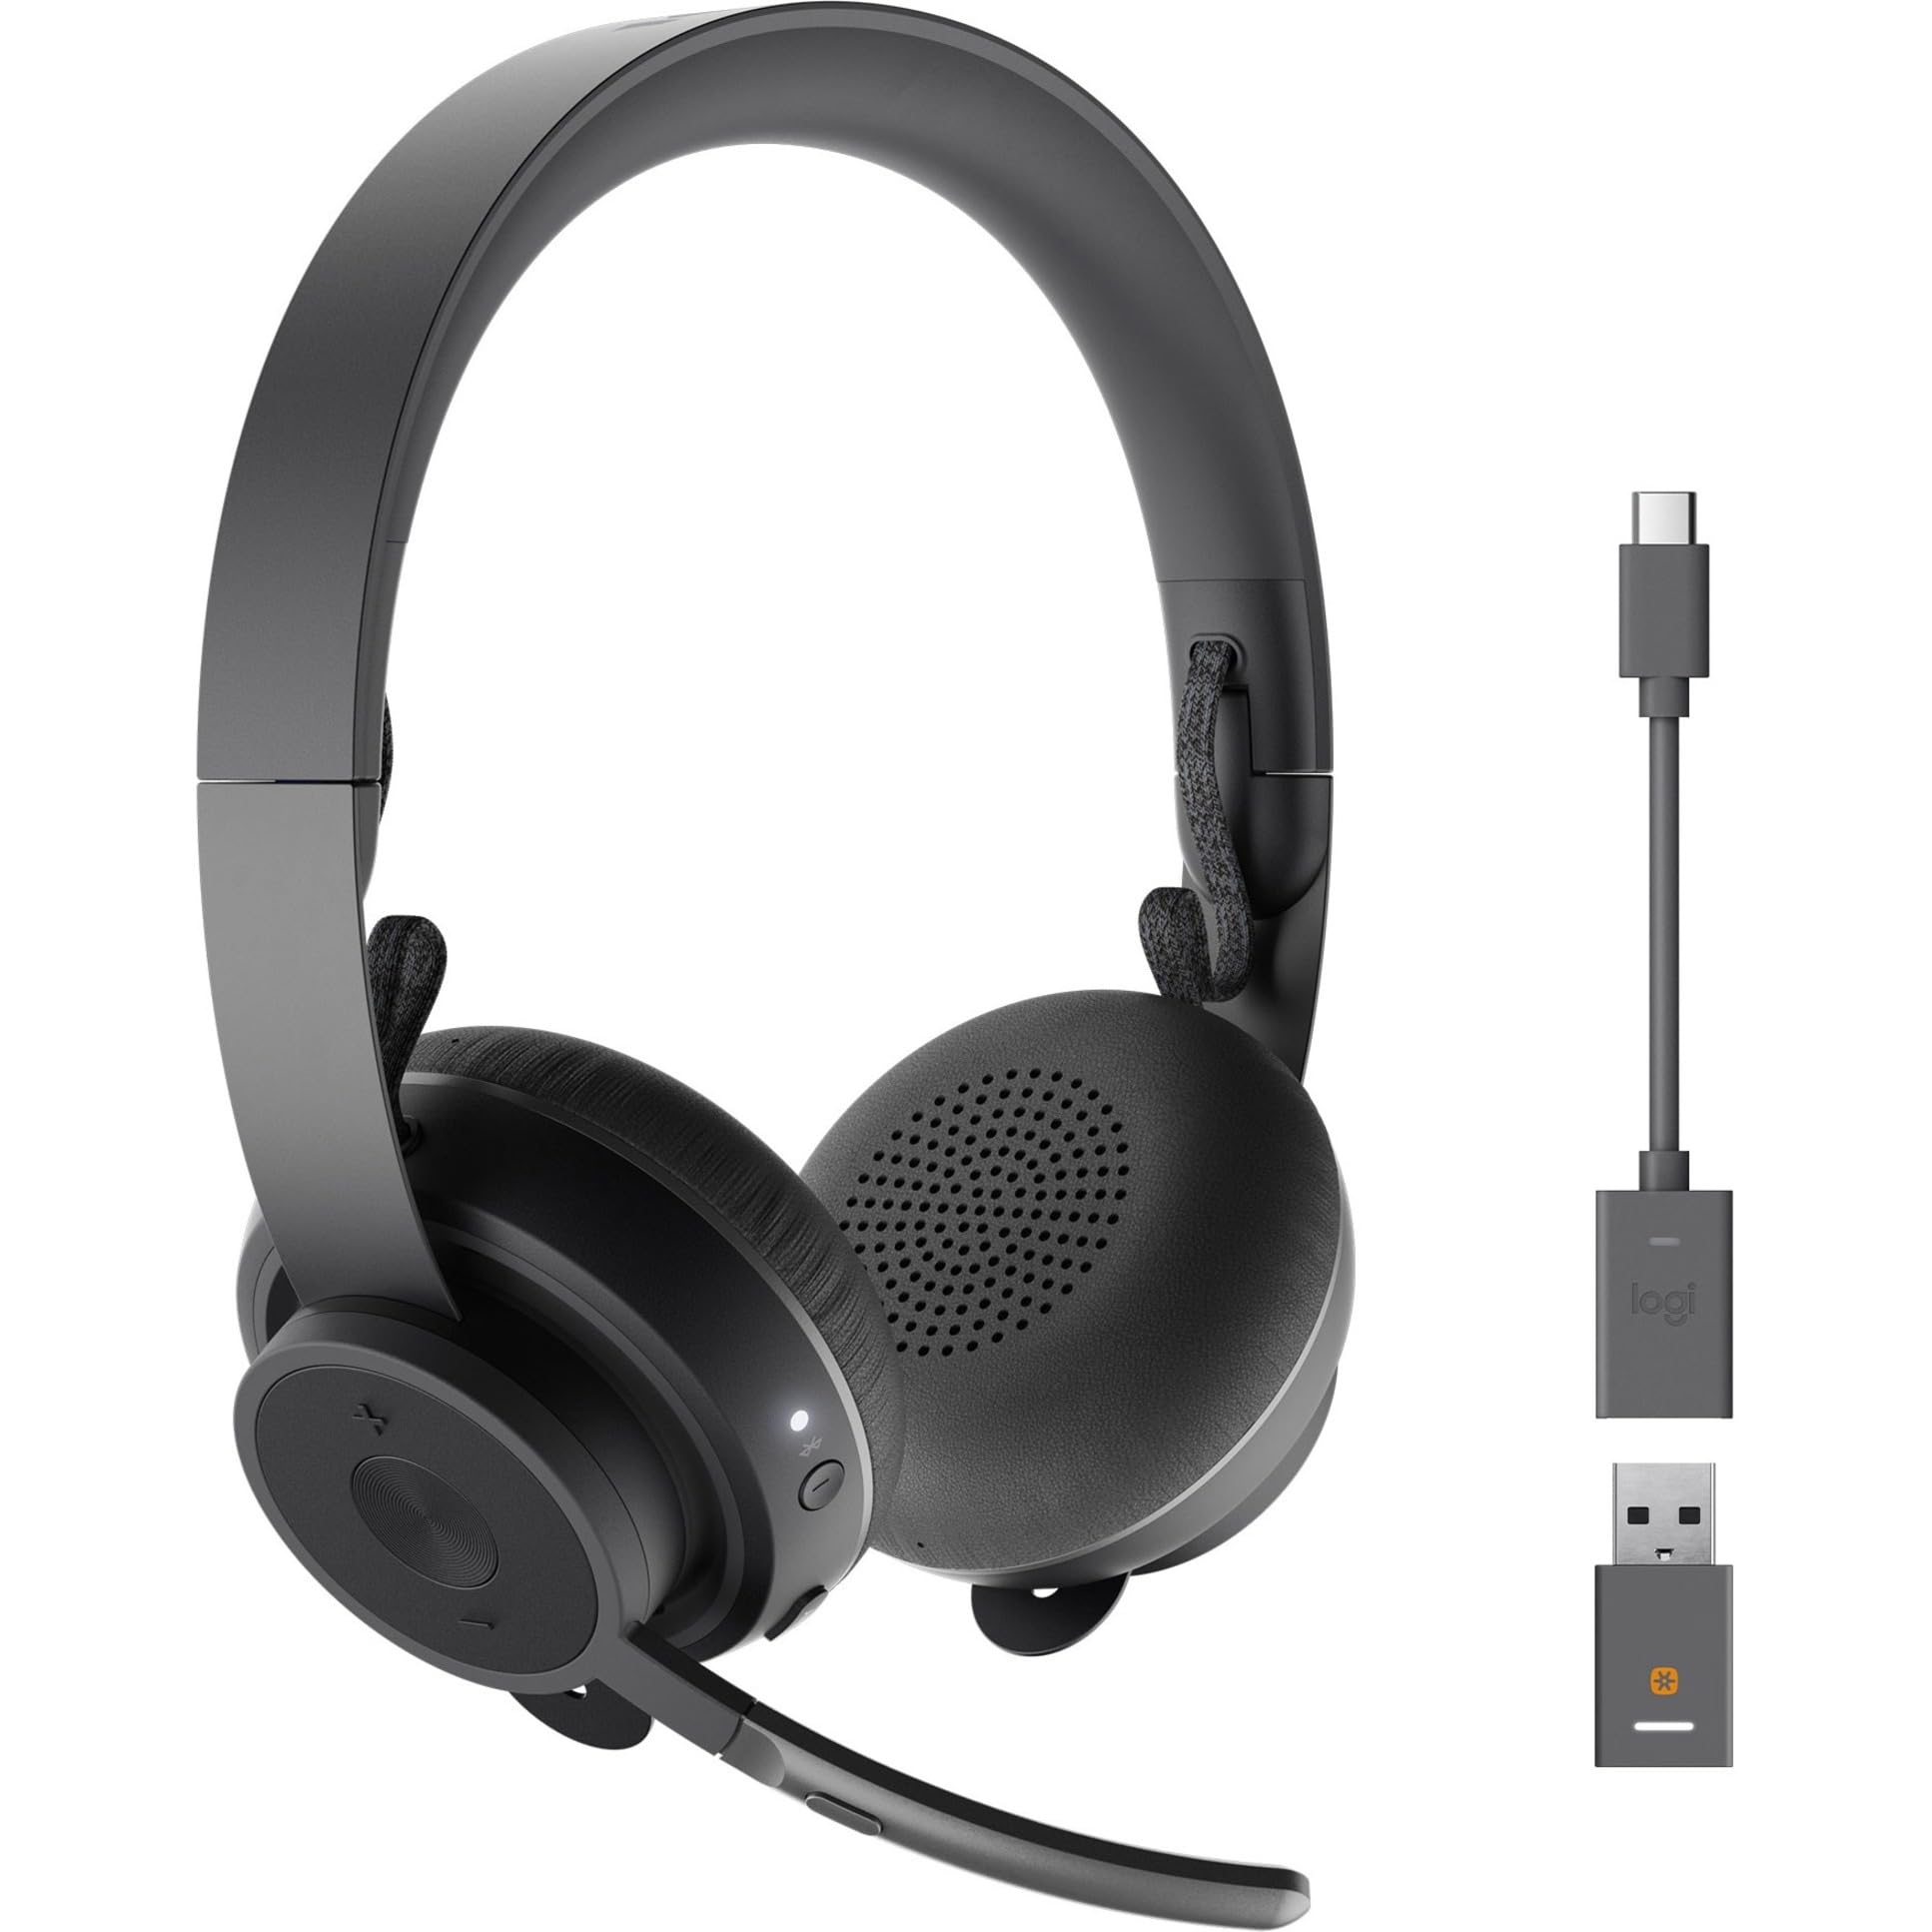 Logitech Zone 900 Headset - 50% off MSRP ($120) at Amazon